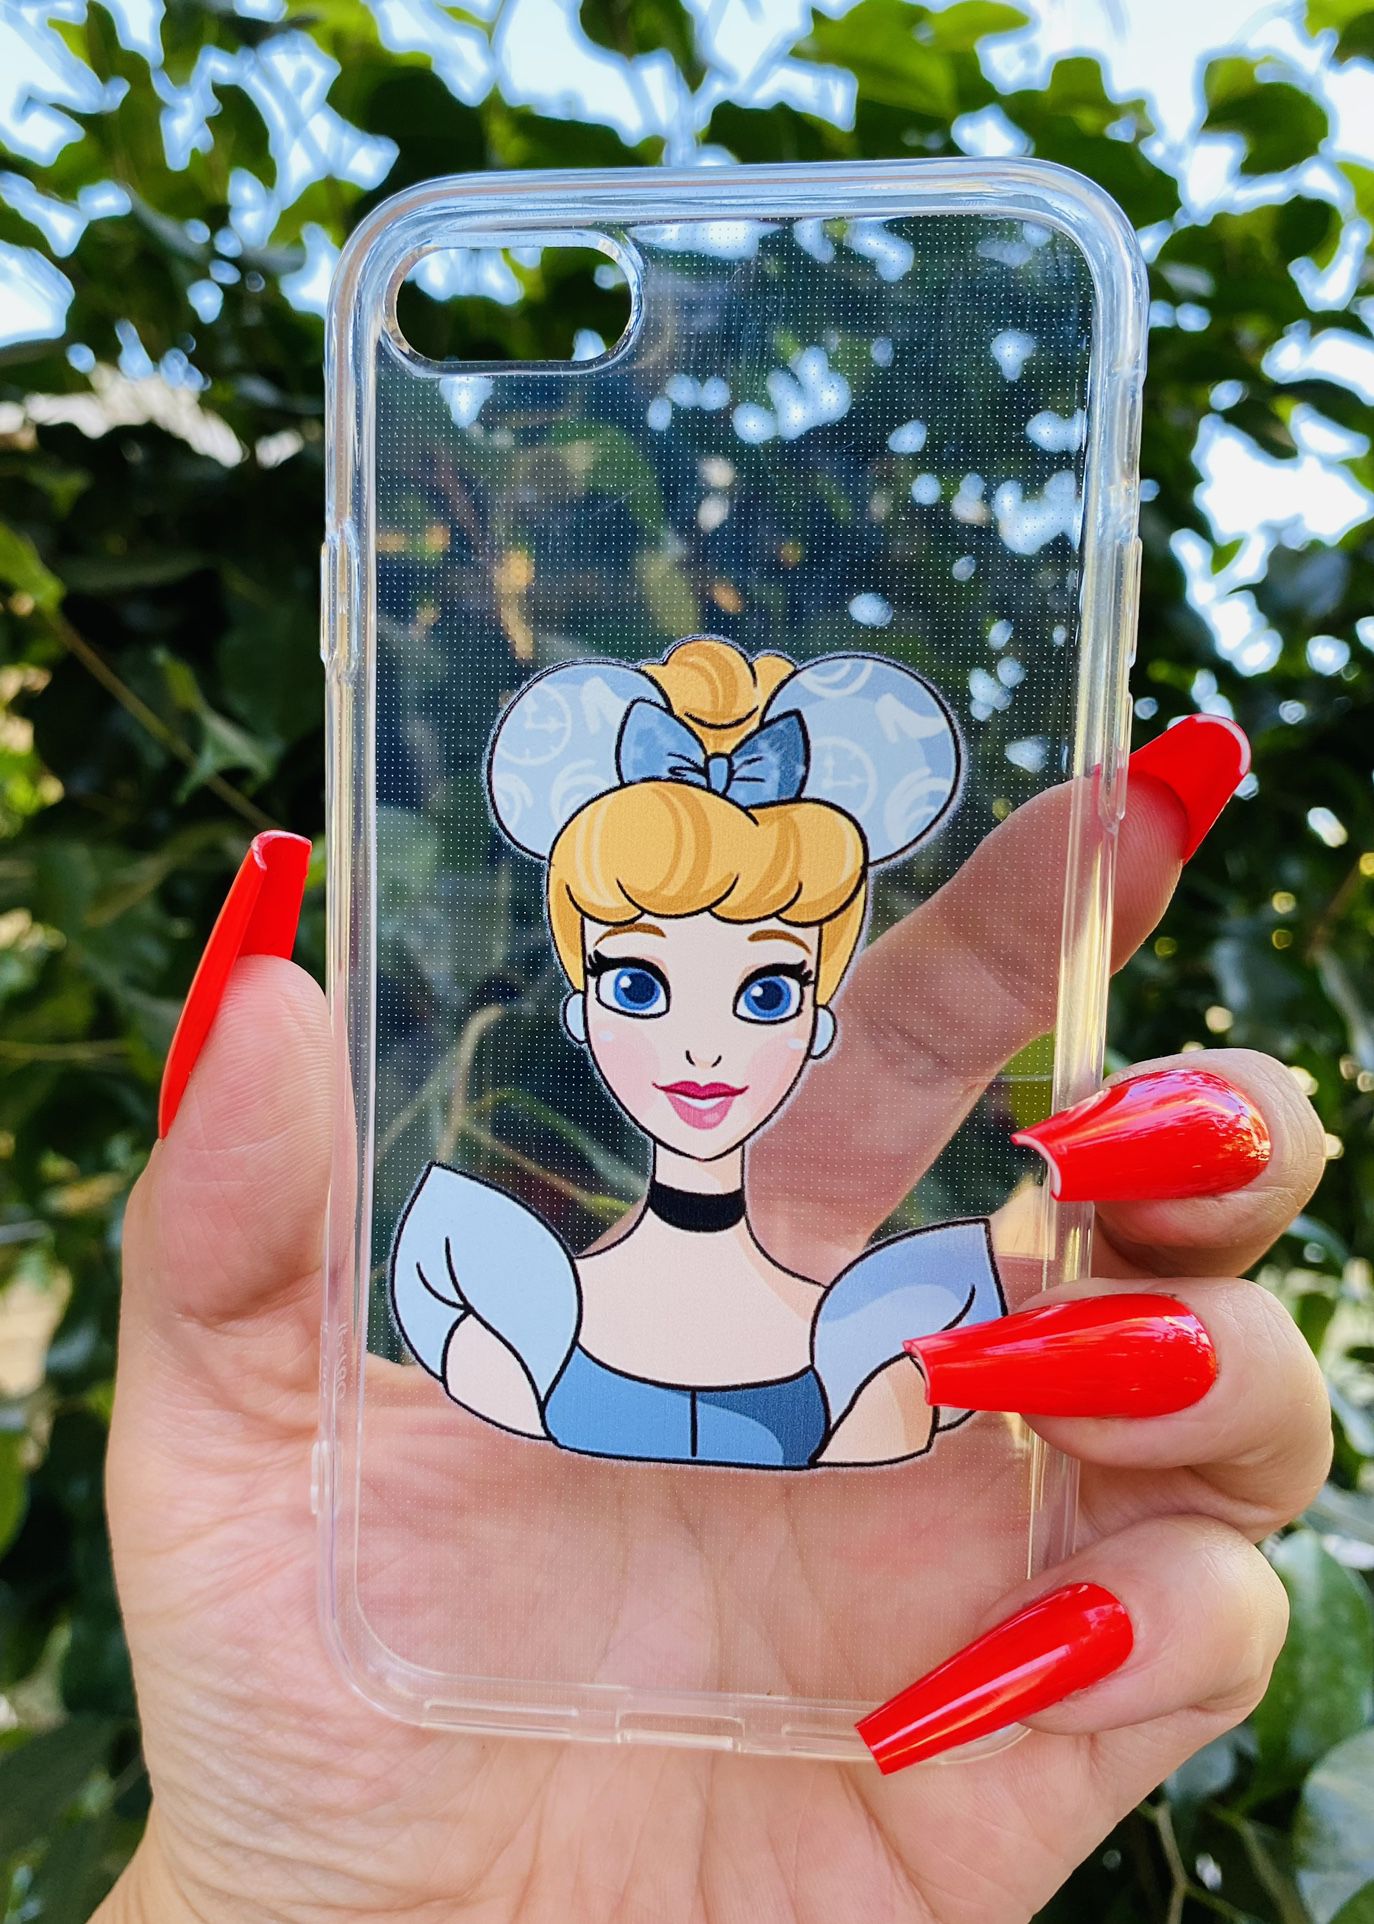 Brand new cool iphone 7, 8 or 2020 SE case cover rubber silicone Clear transparent see through CINDERELLA Princess Disney Disneyland Womens Girls